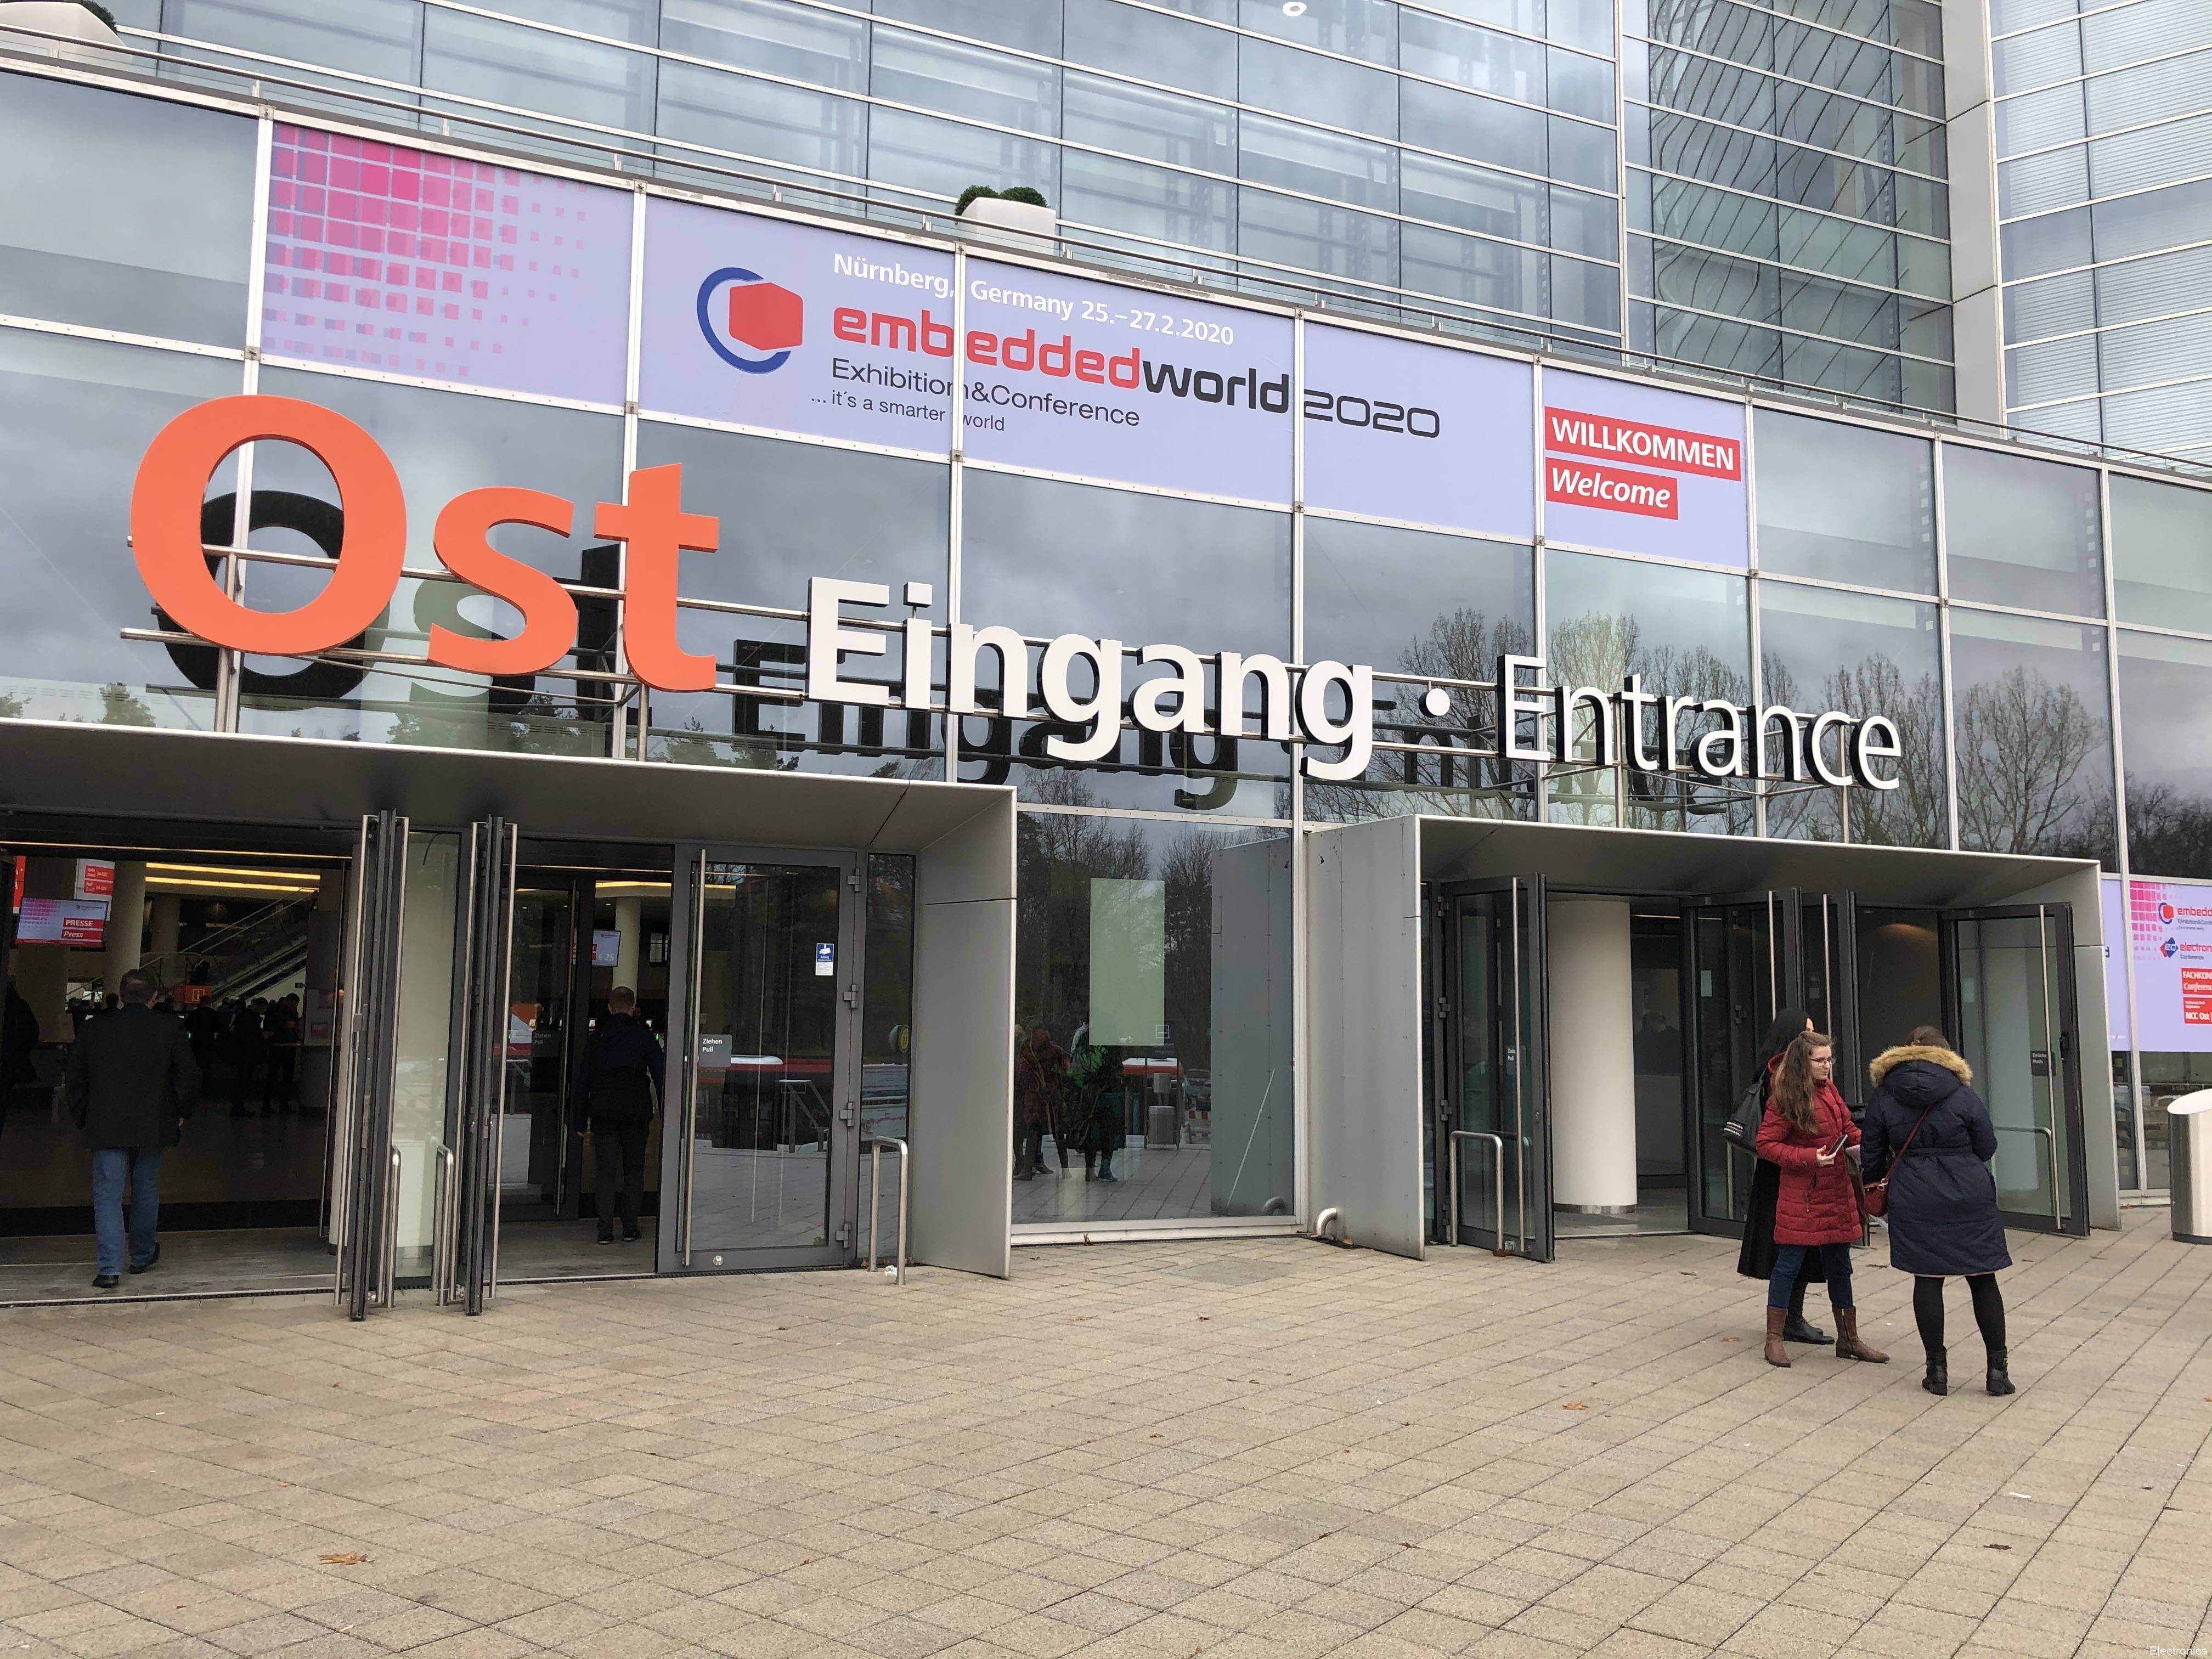 Embedded World 2023: Get the full Electronics Weekly Guide